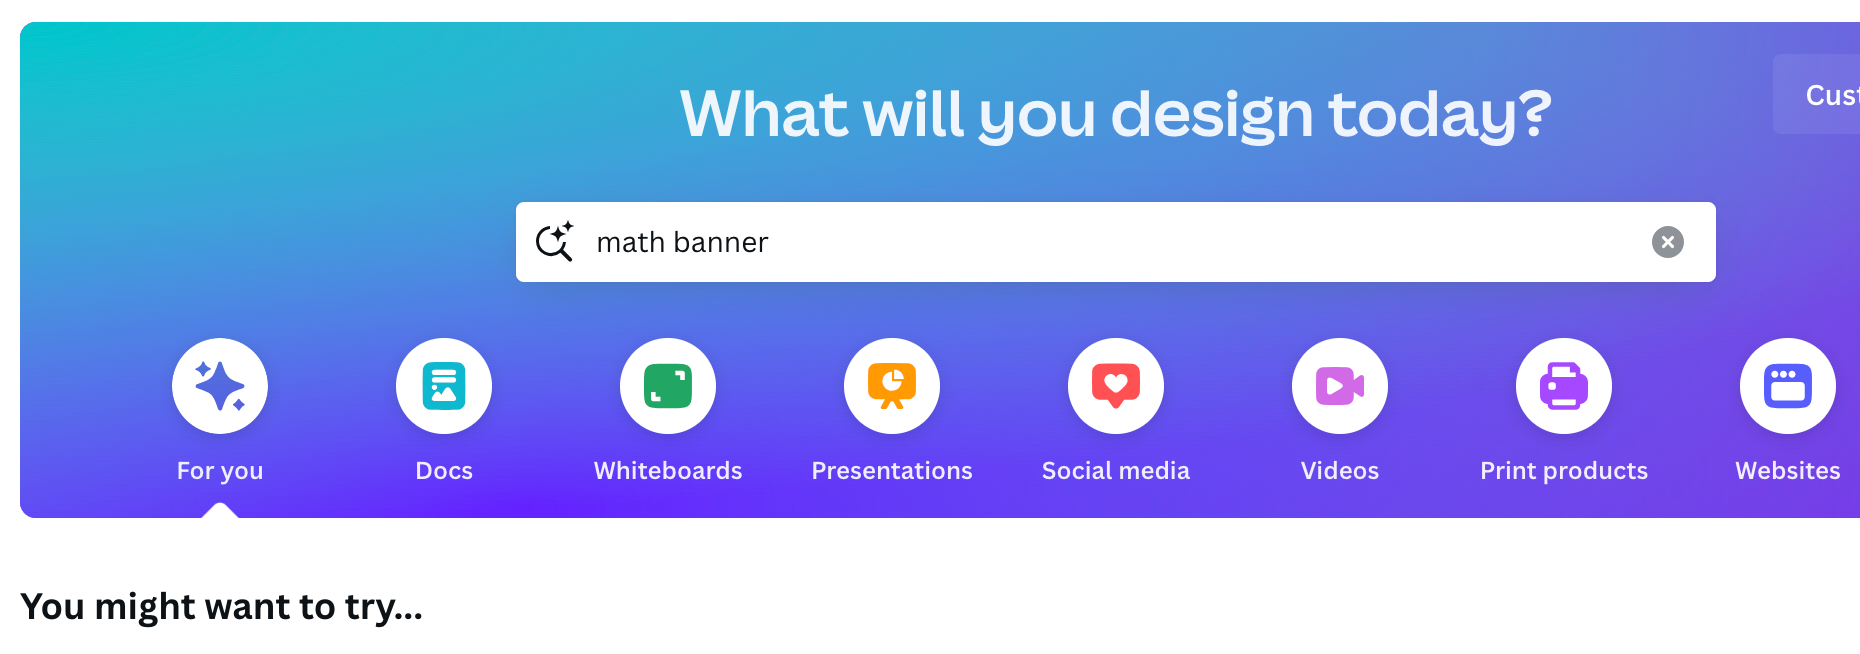 Canva landing page menu with various design options